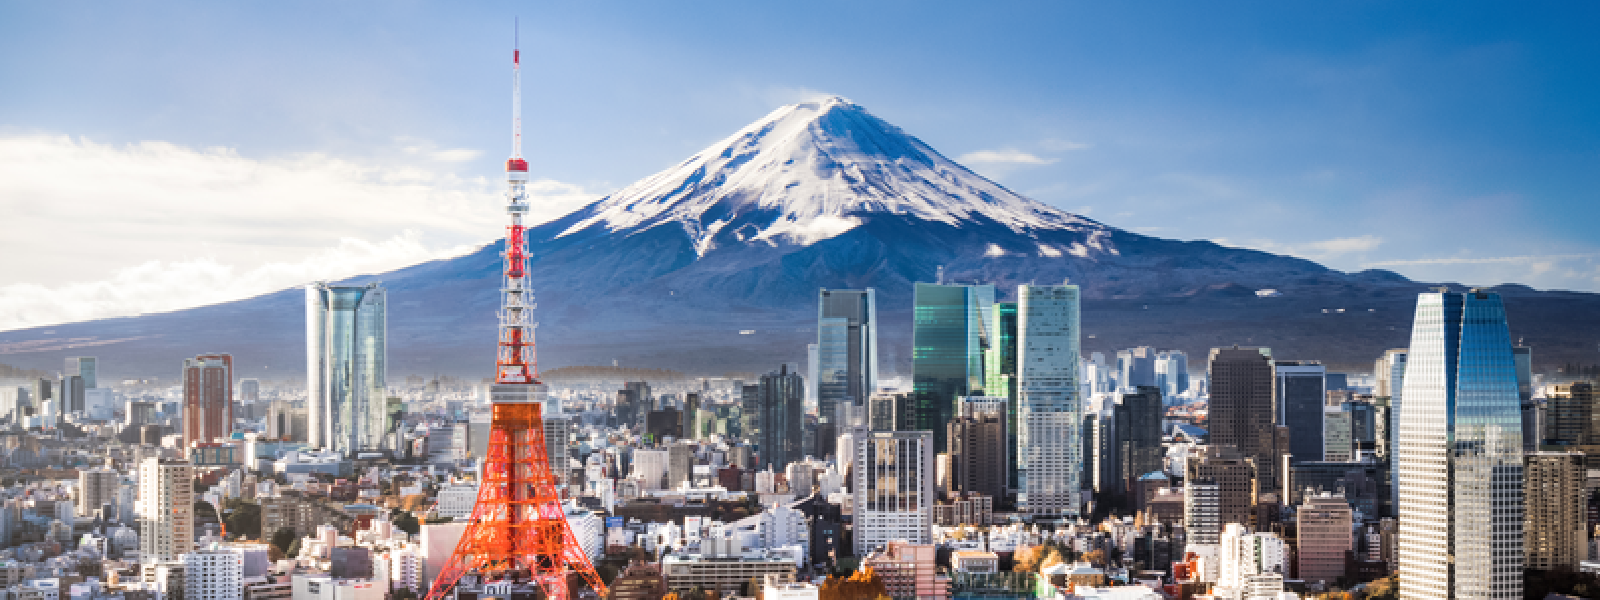 Japan’s PE market is thriving, with potential for exits to follow